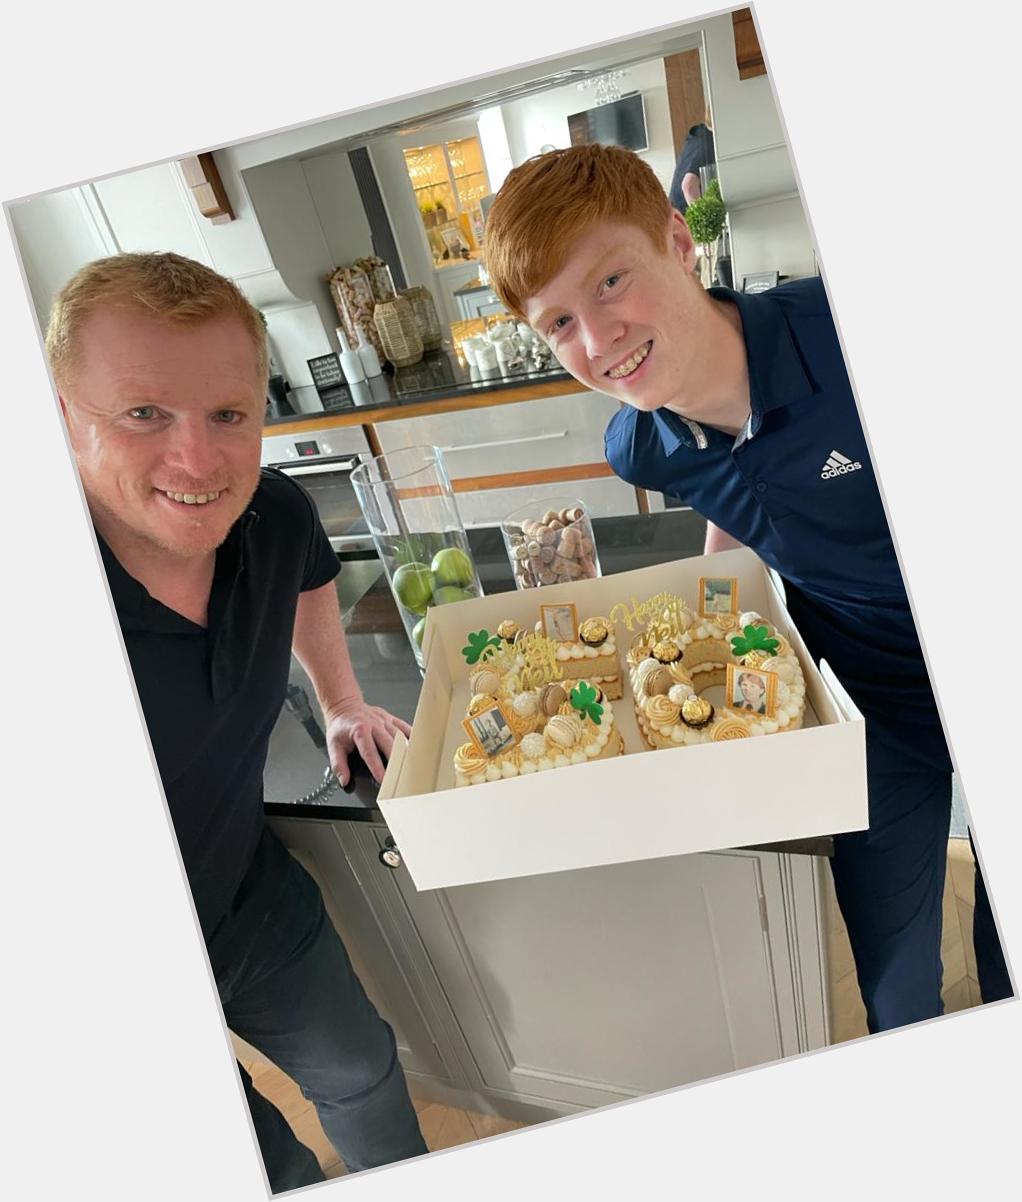 Happy 50th Birthday Neil Lennon
Stunning cake from Nicola and Dreams by Nic 